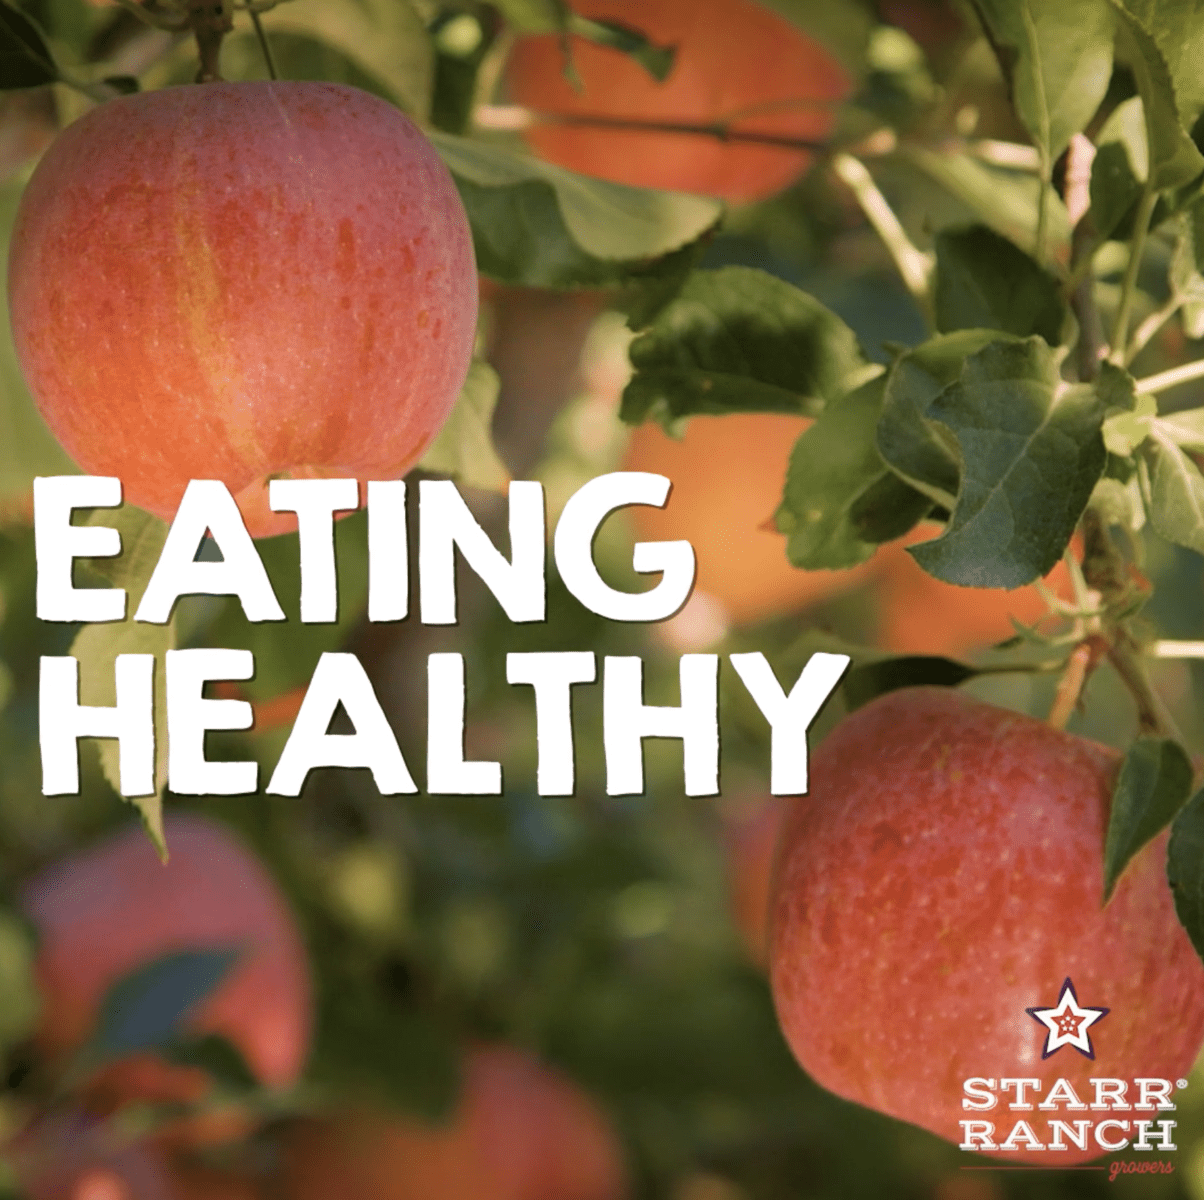 Starr Ranch Growers: Eating Healthy is Delicious!